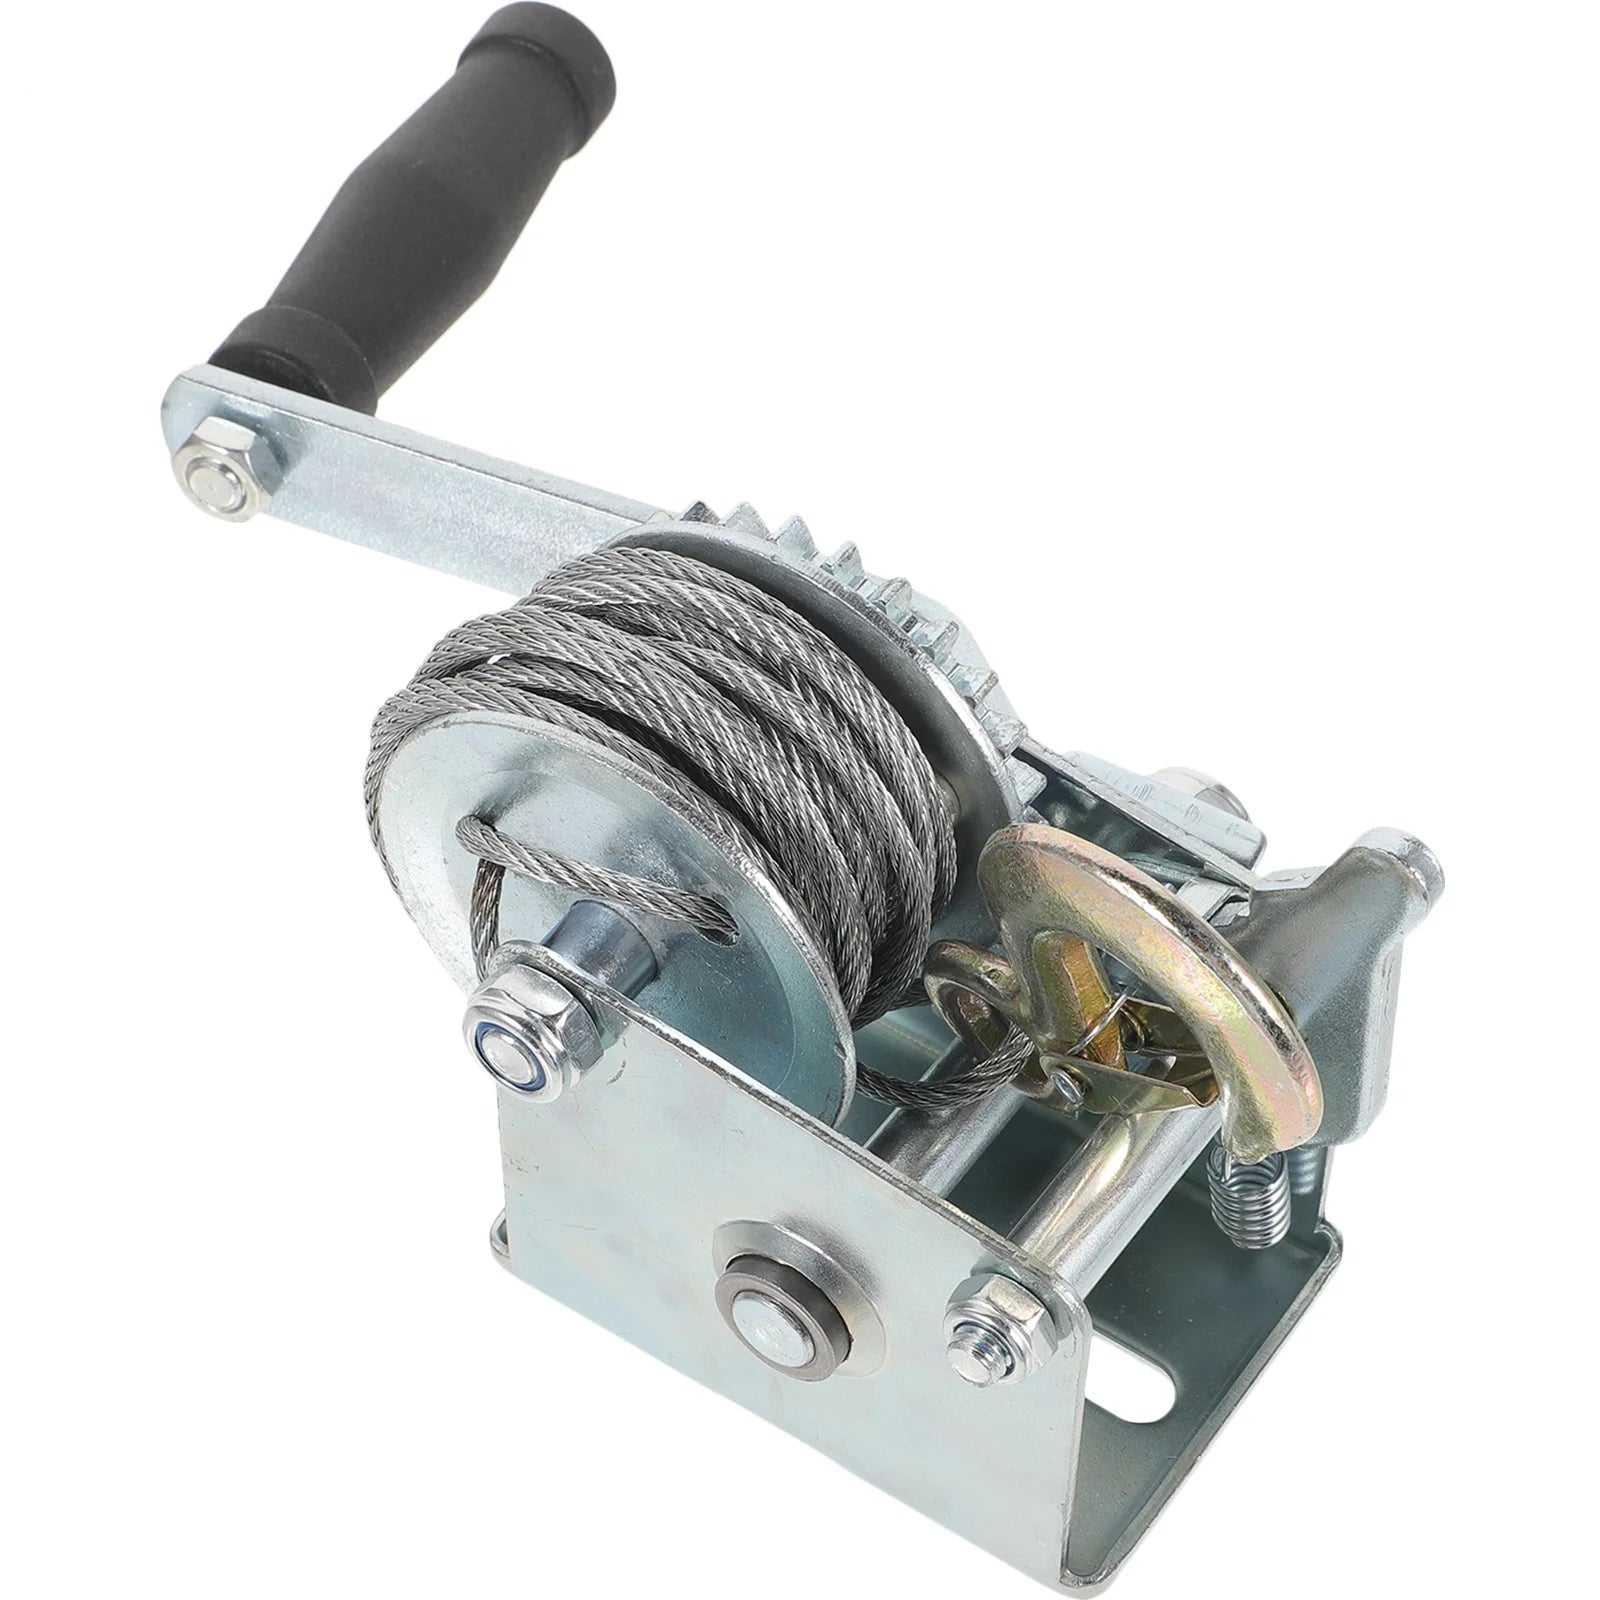 Heavy Duty Winch Manual Towing Winch Mini Trailer Winch 500LBS (With 7m Steel Cable)